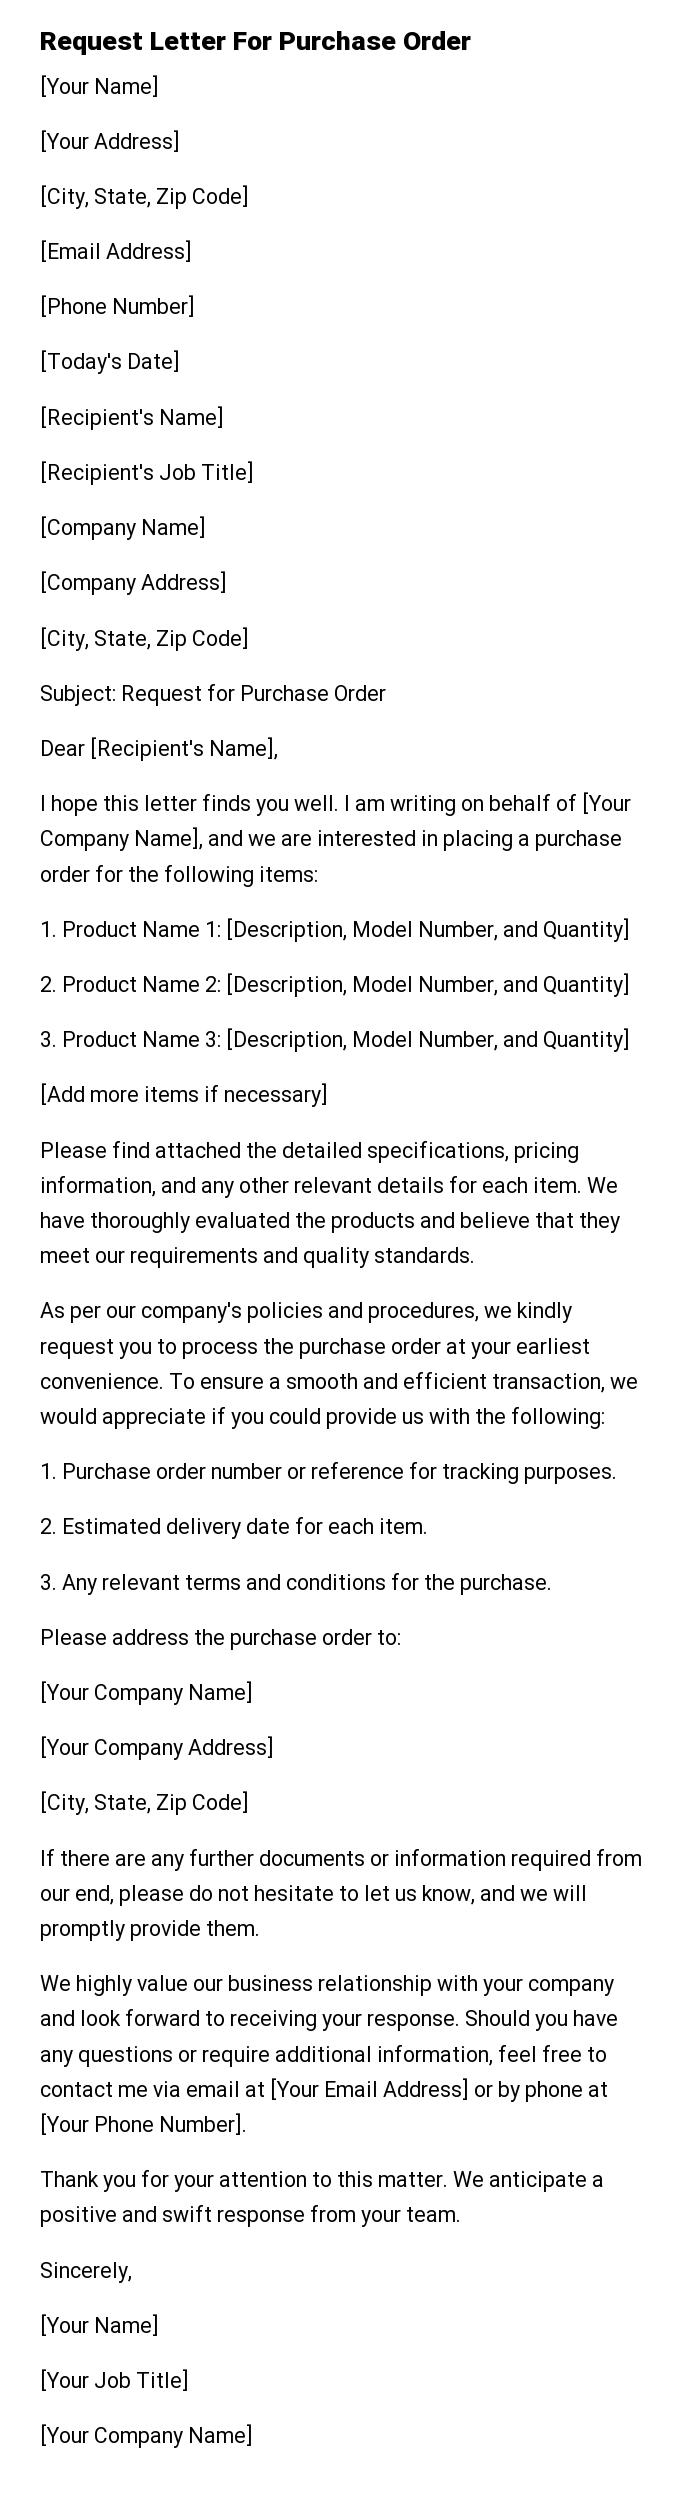 Request Letter For Purchase Order